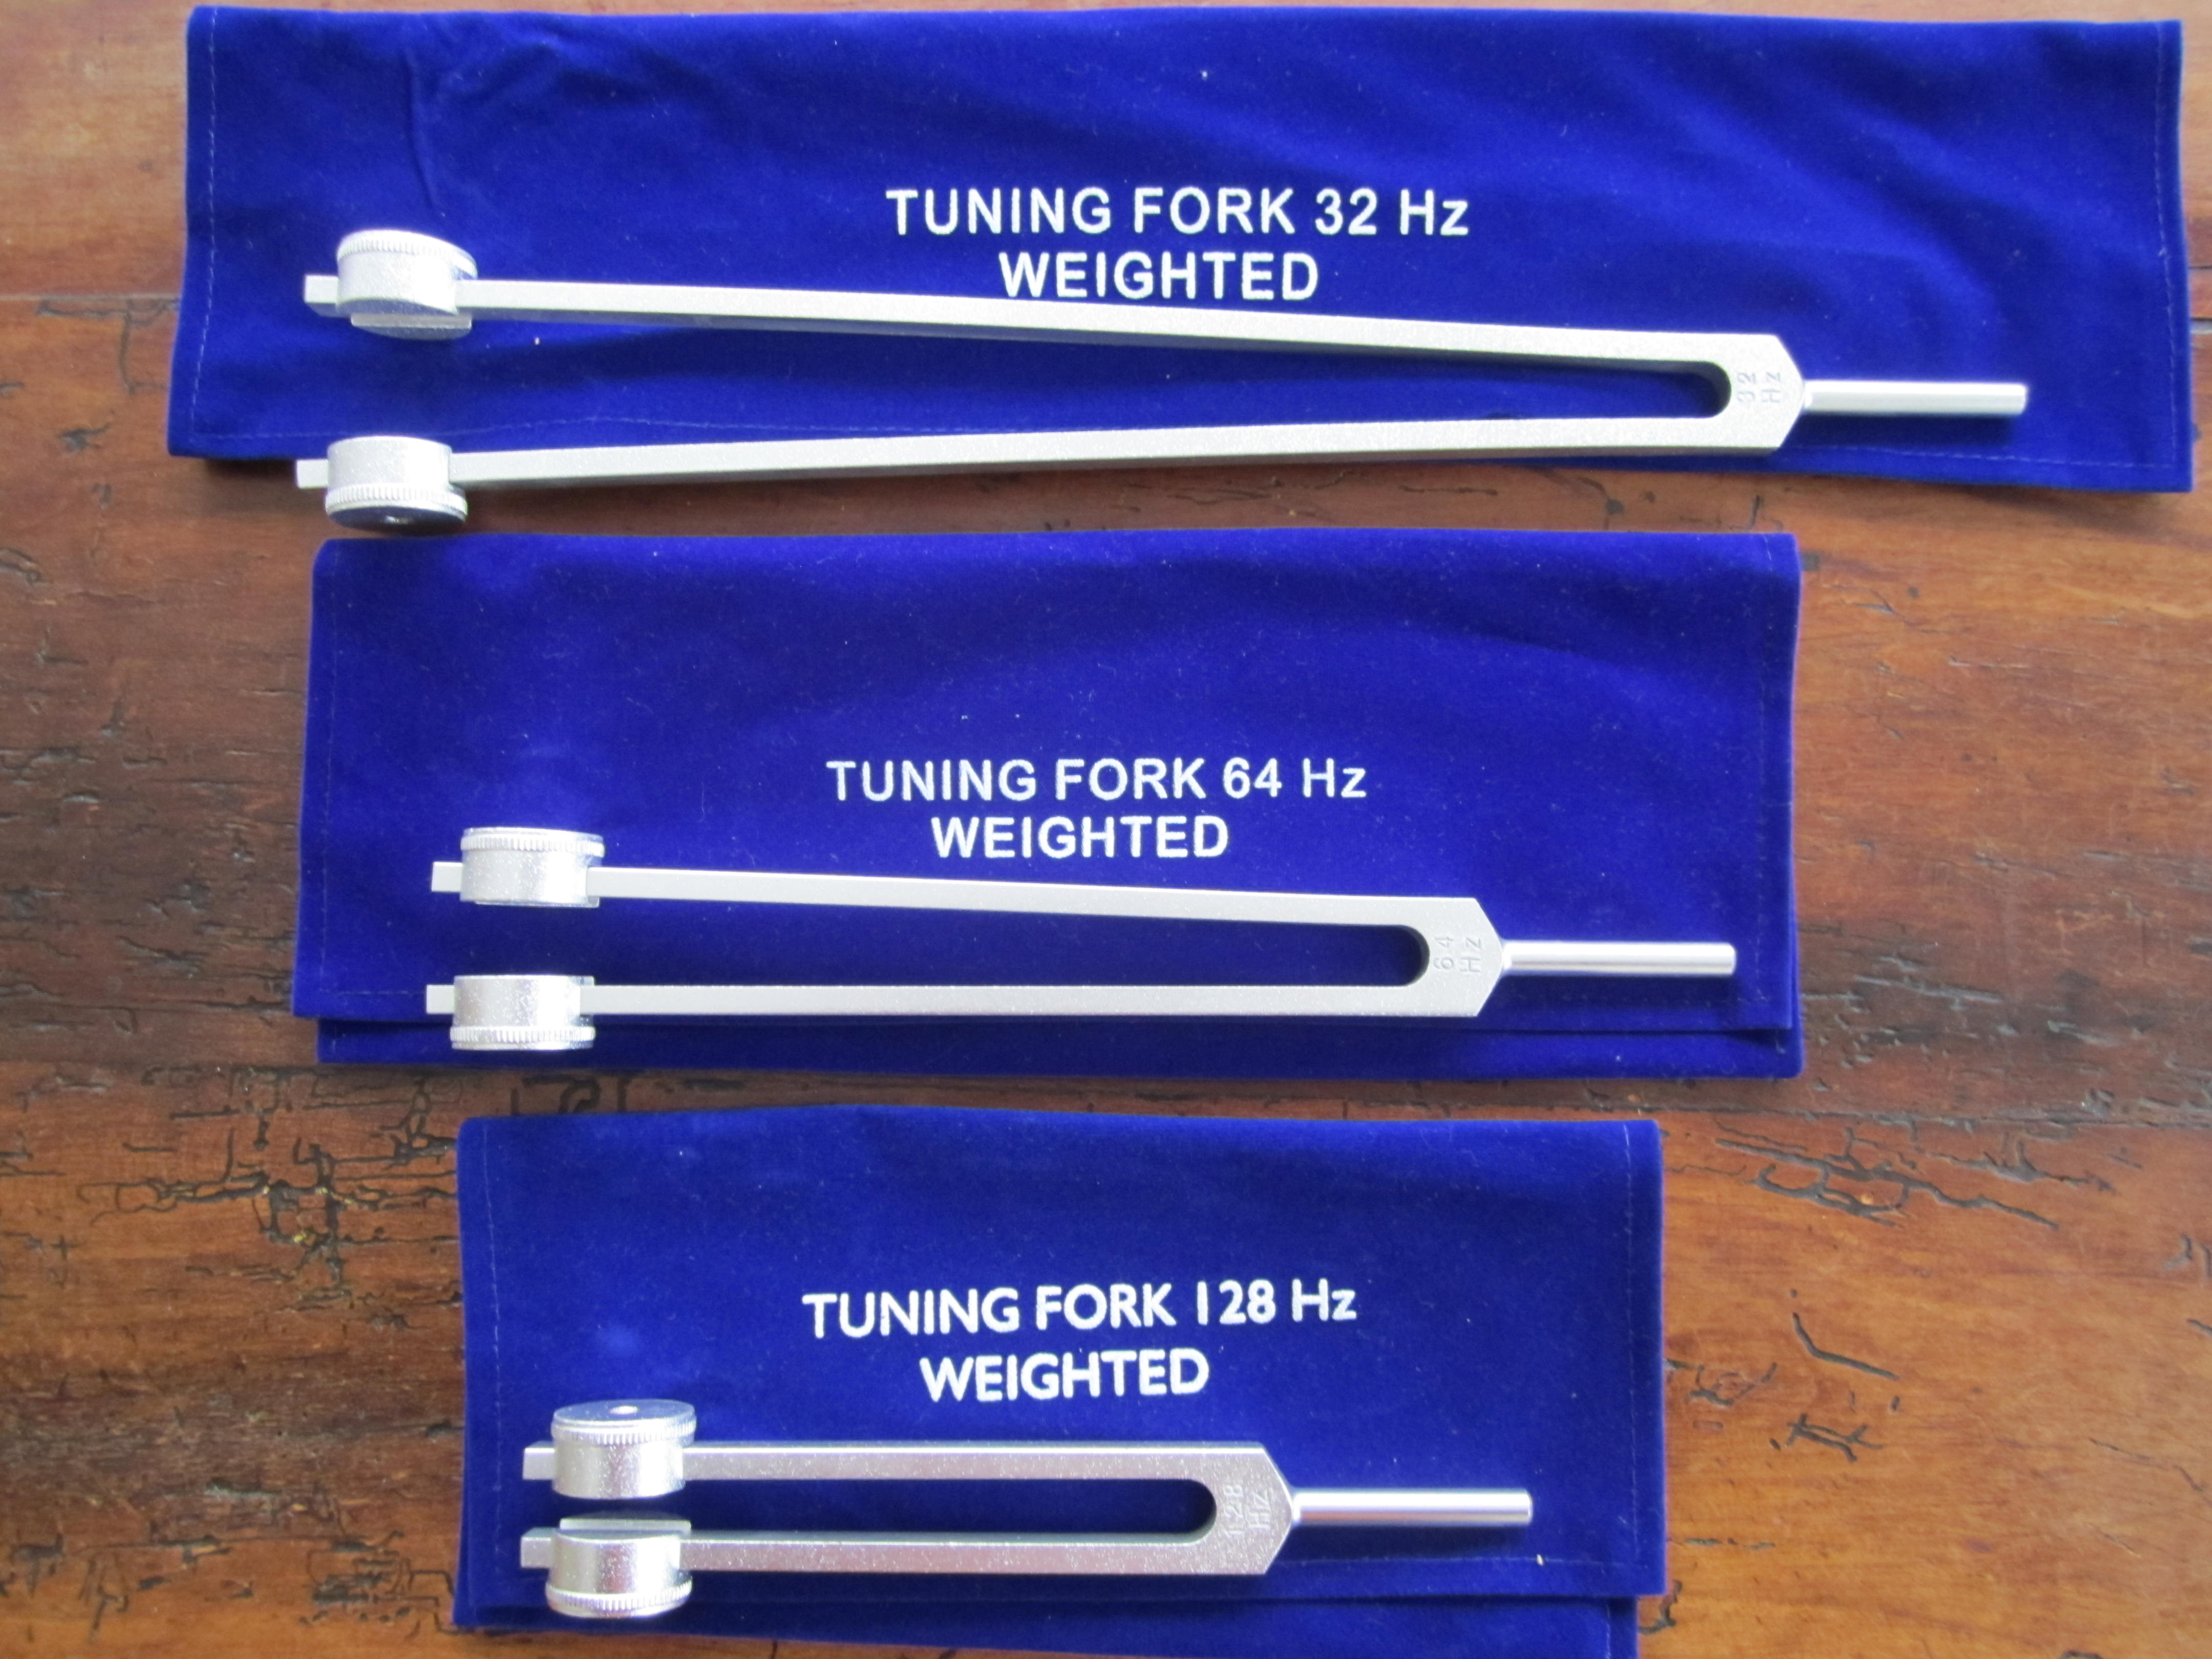 Light tune. Tuning forks c128 Aesculap. Камертон Tuning fork. Камертон-а усилитель. Tuning fork Sound Therapy.